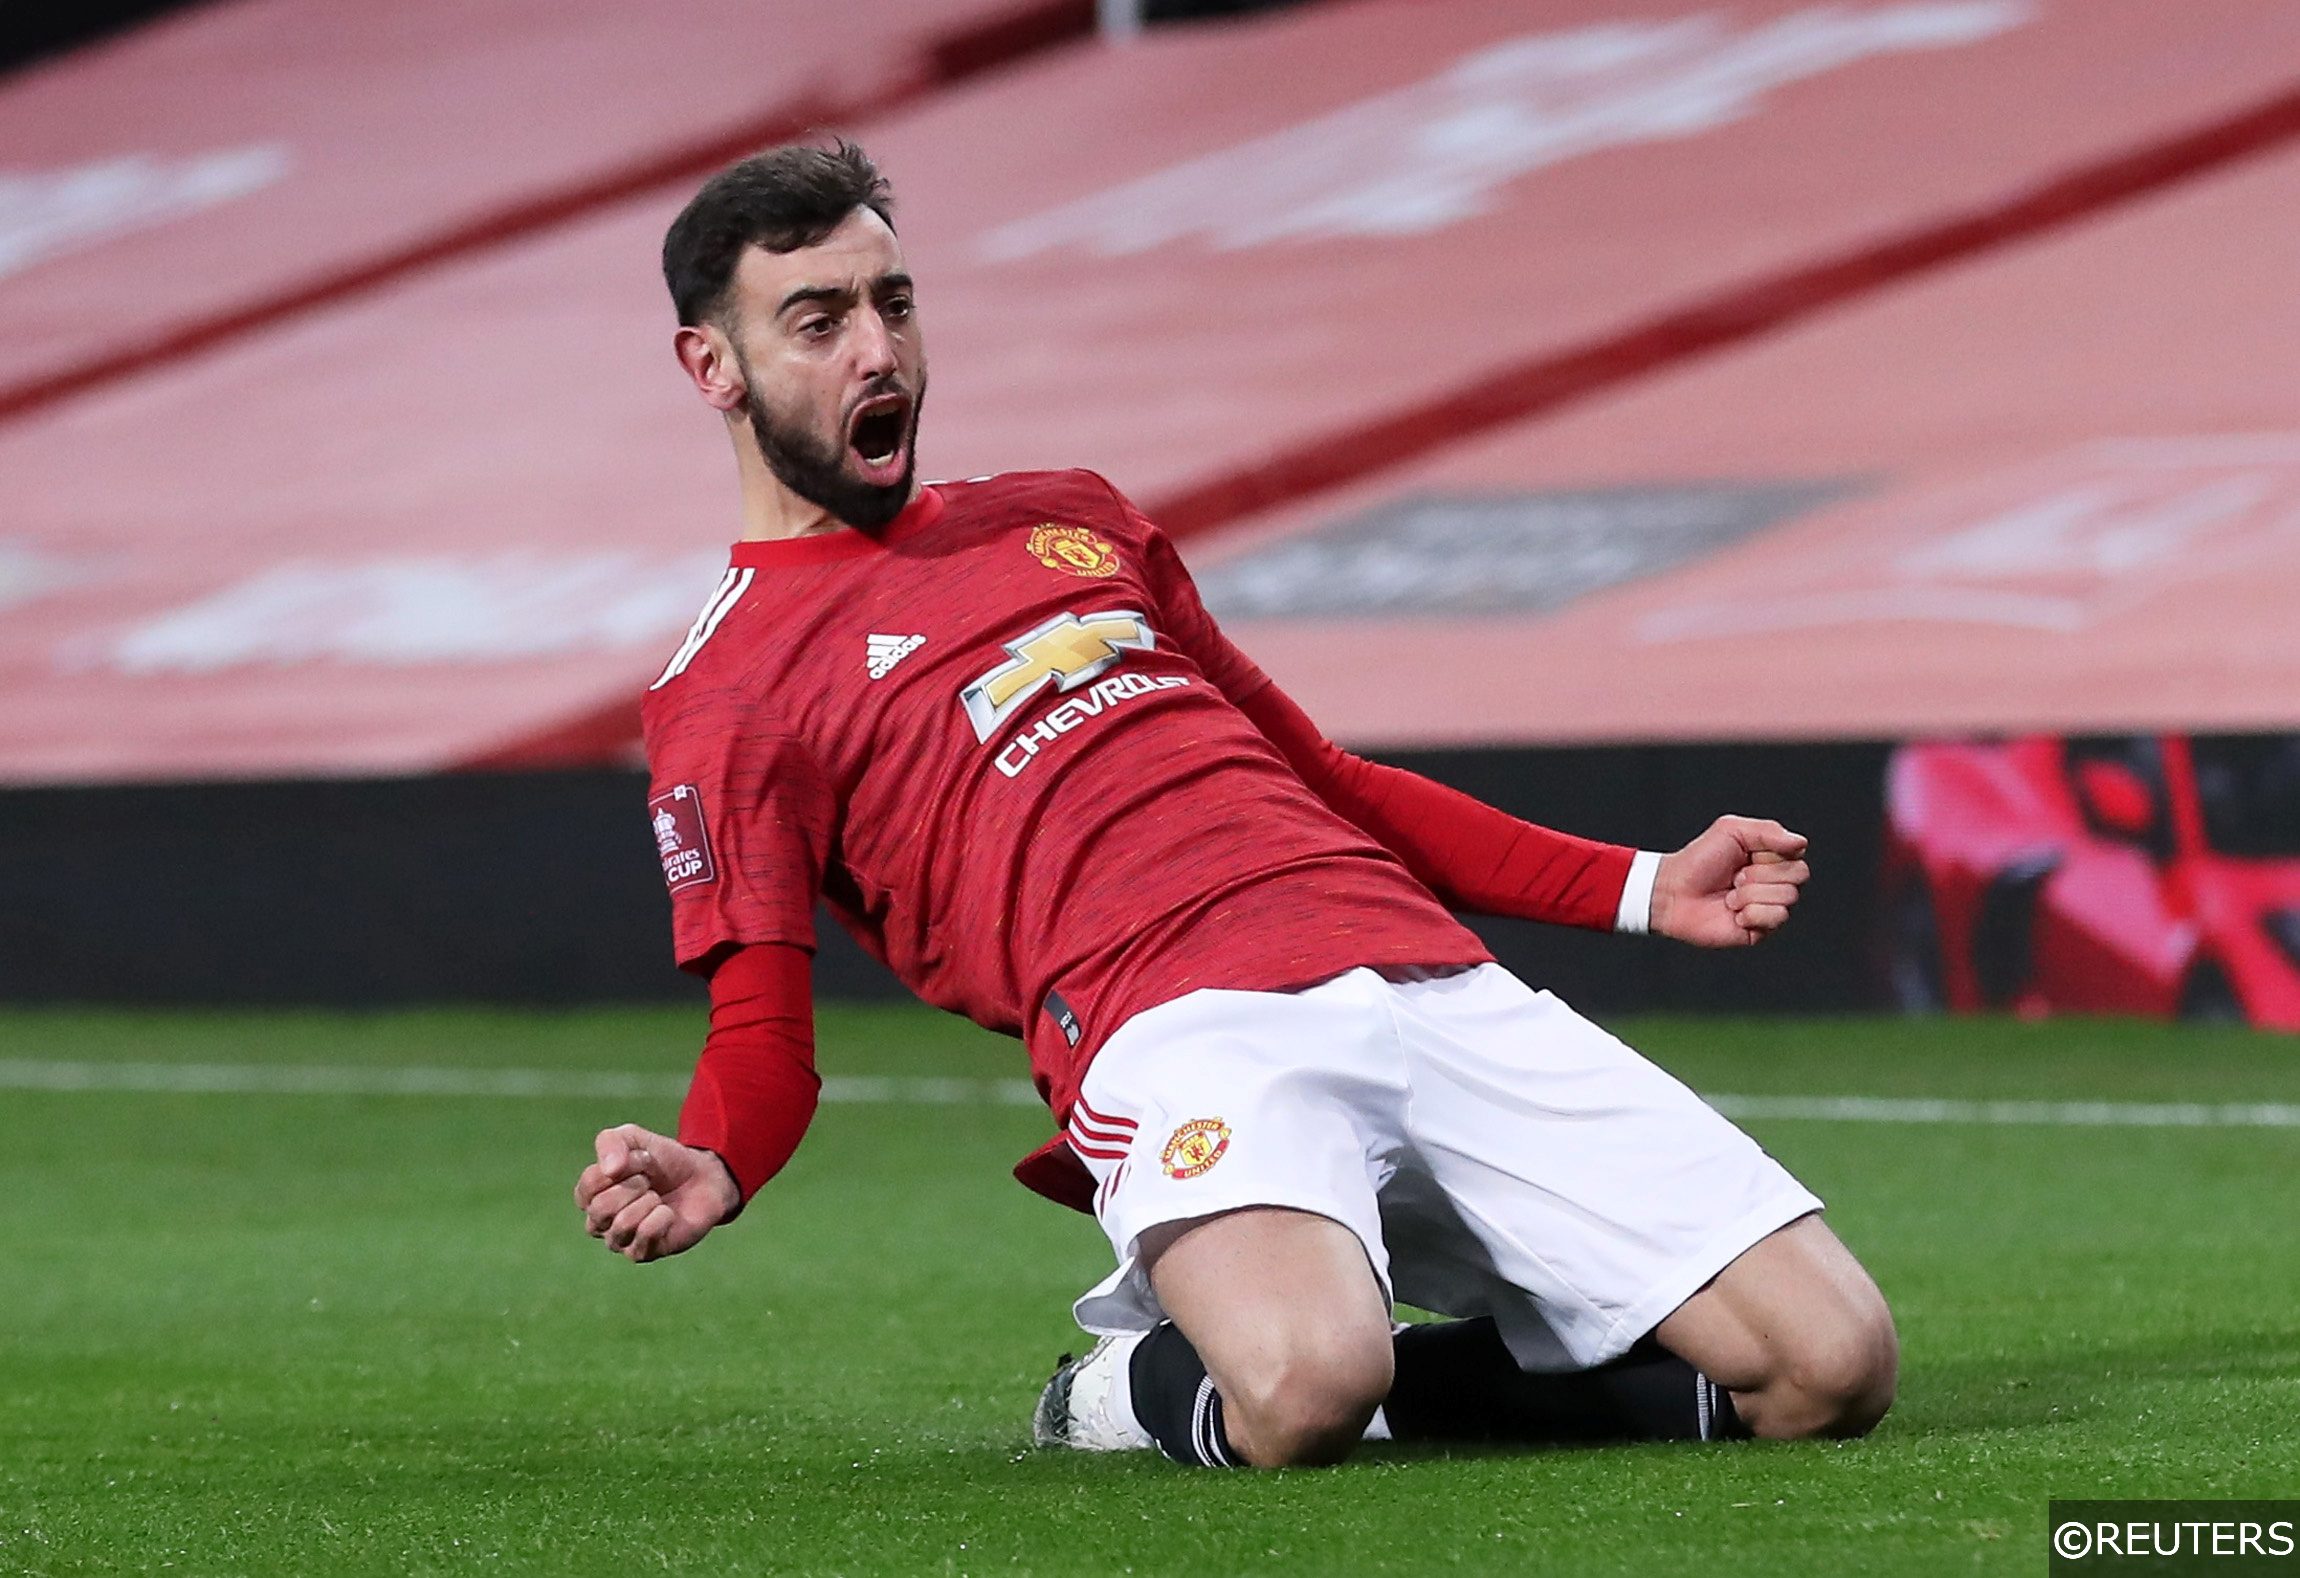 Bruno Fernandes for Manchester United in FA Cup